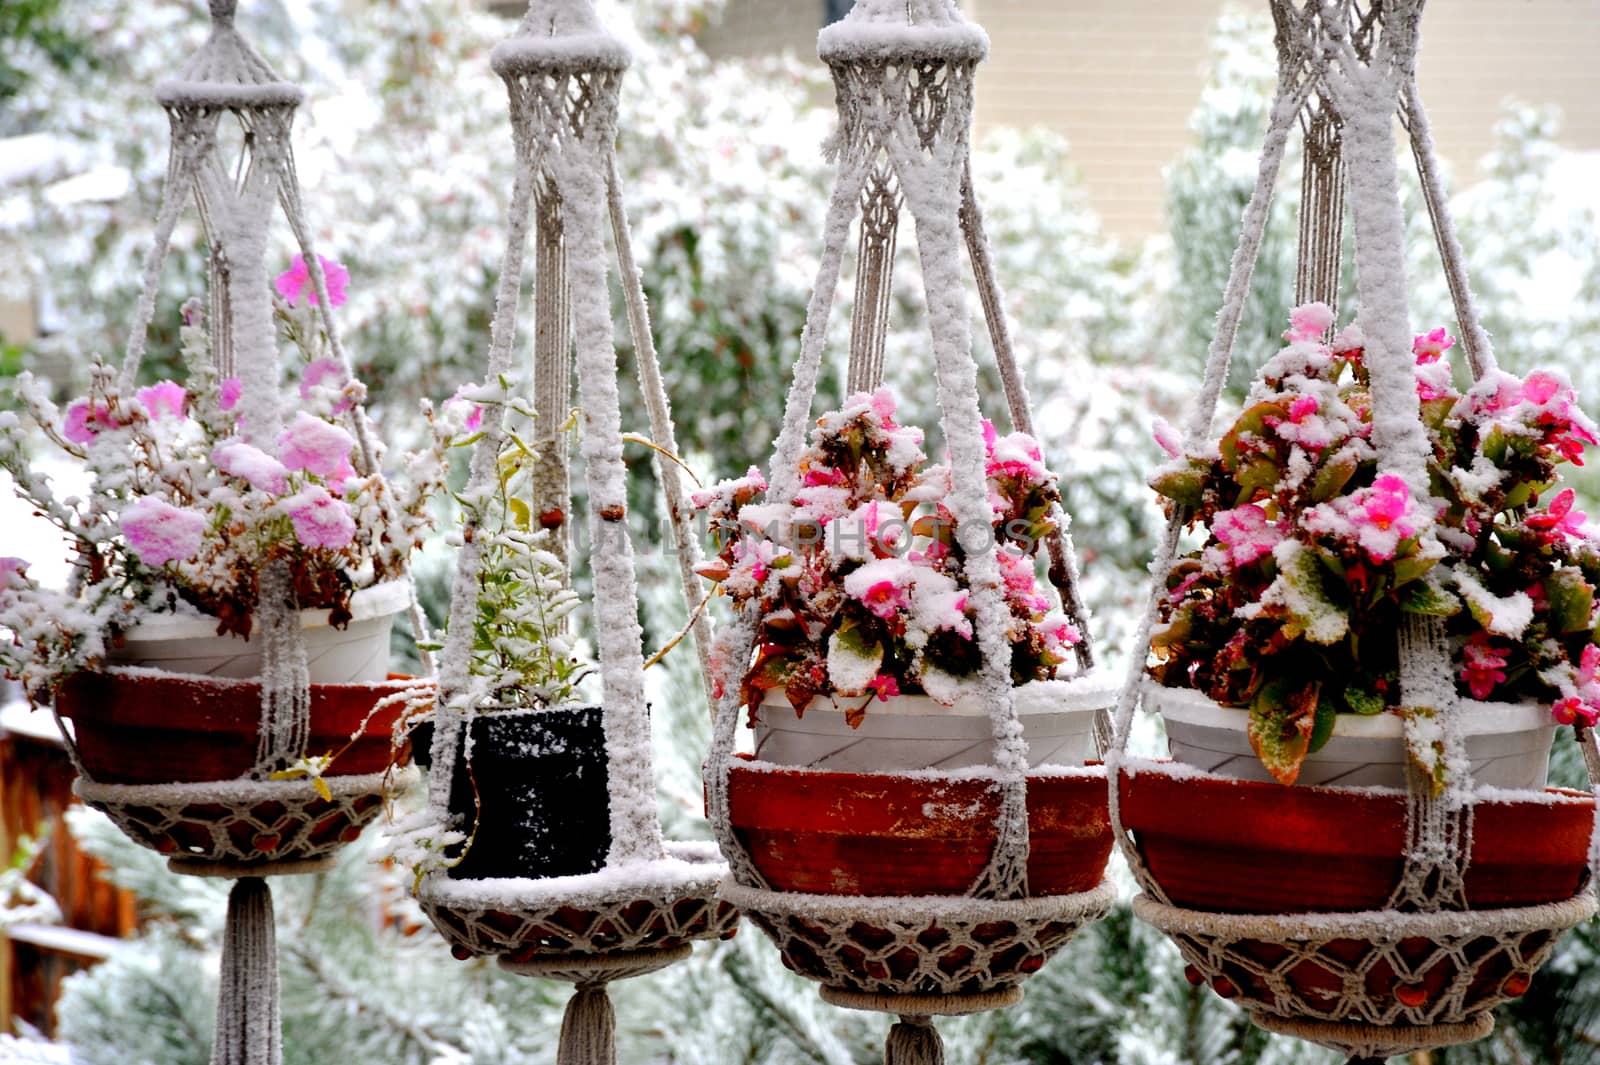 Winter snow on patio deck outdoors.